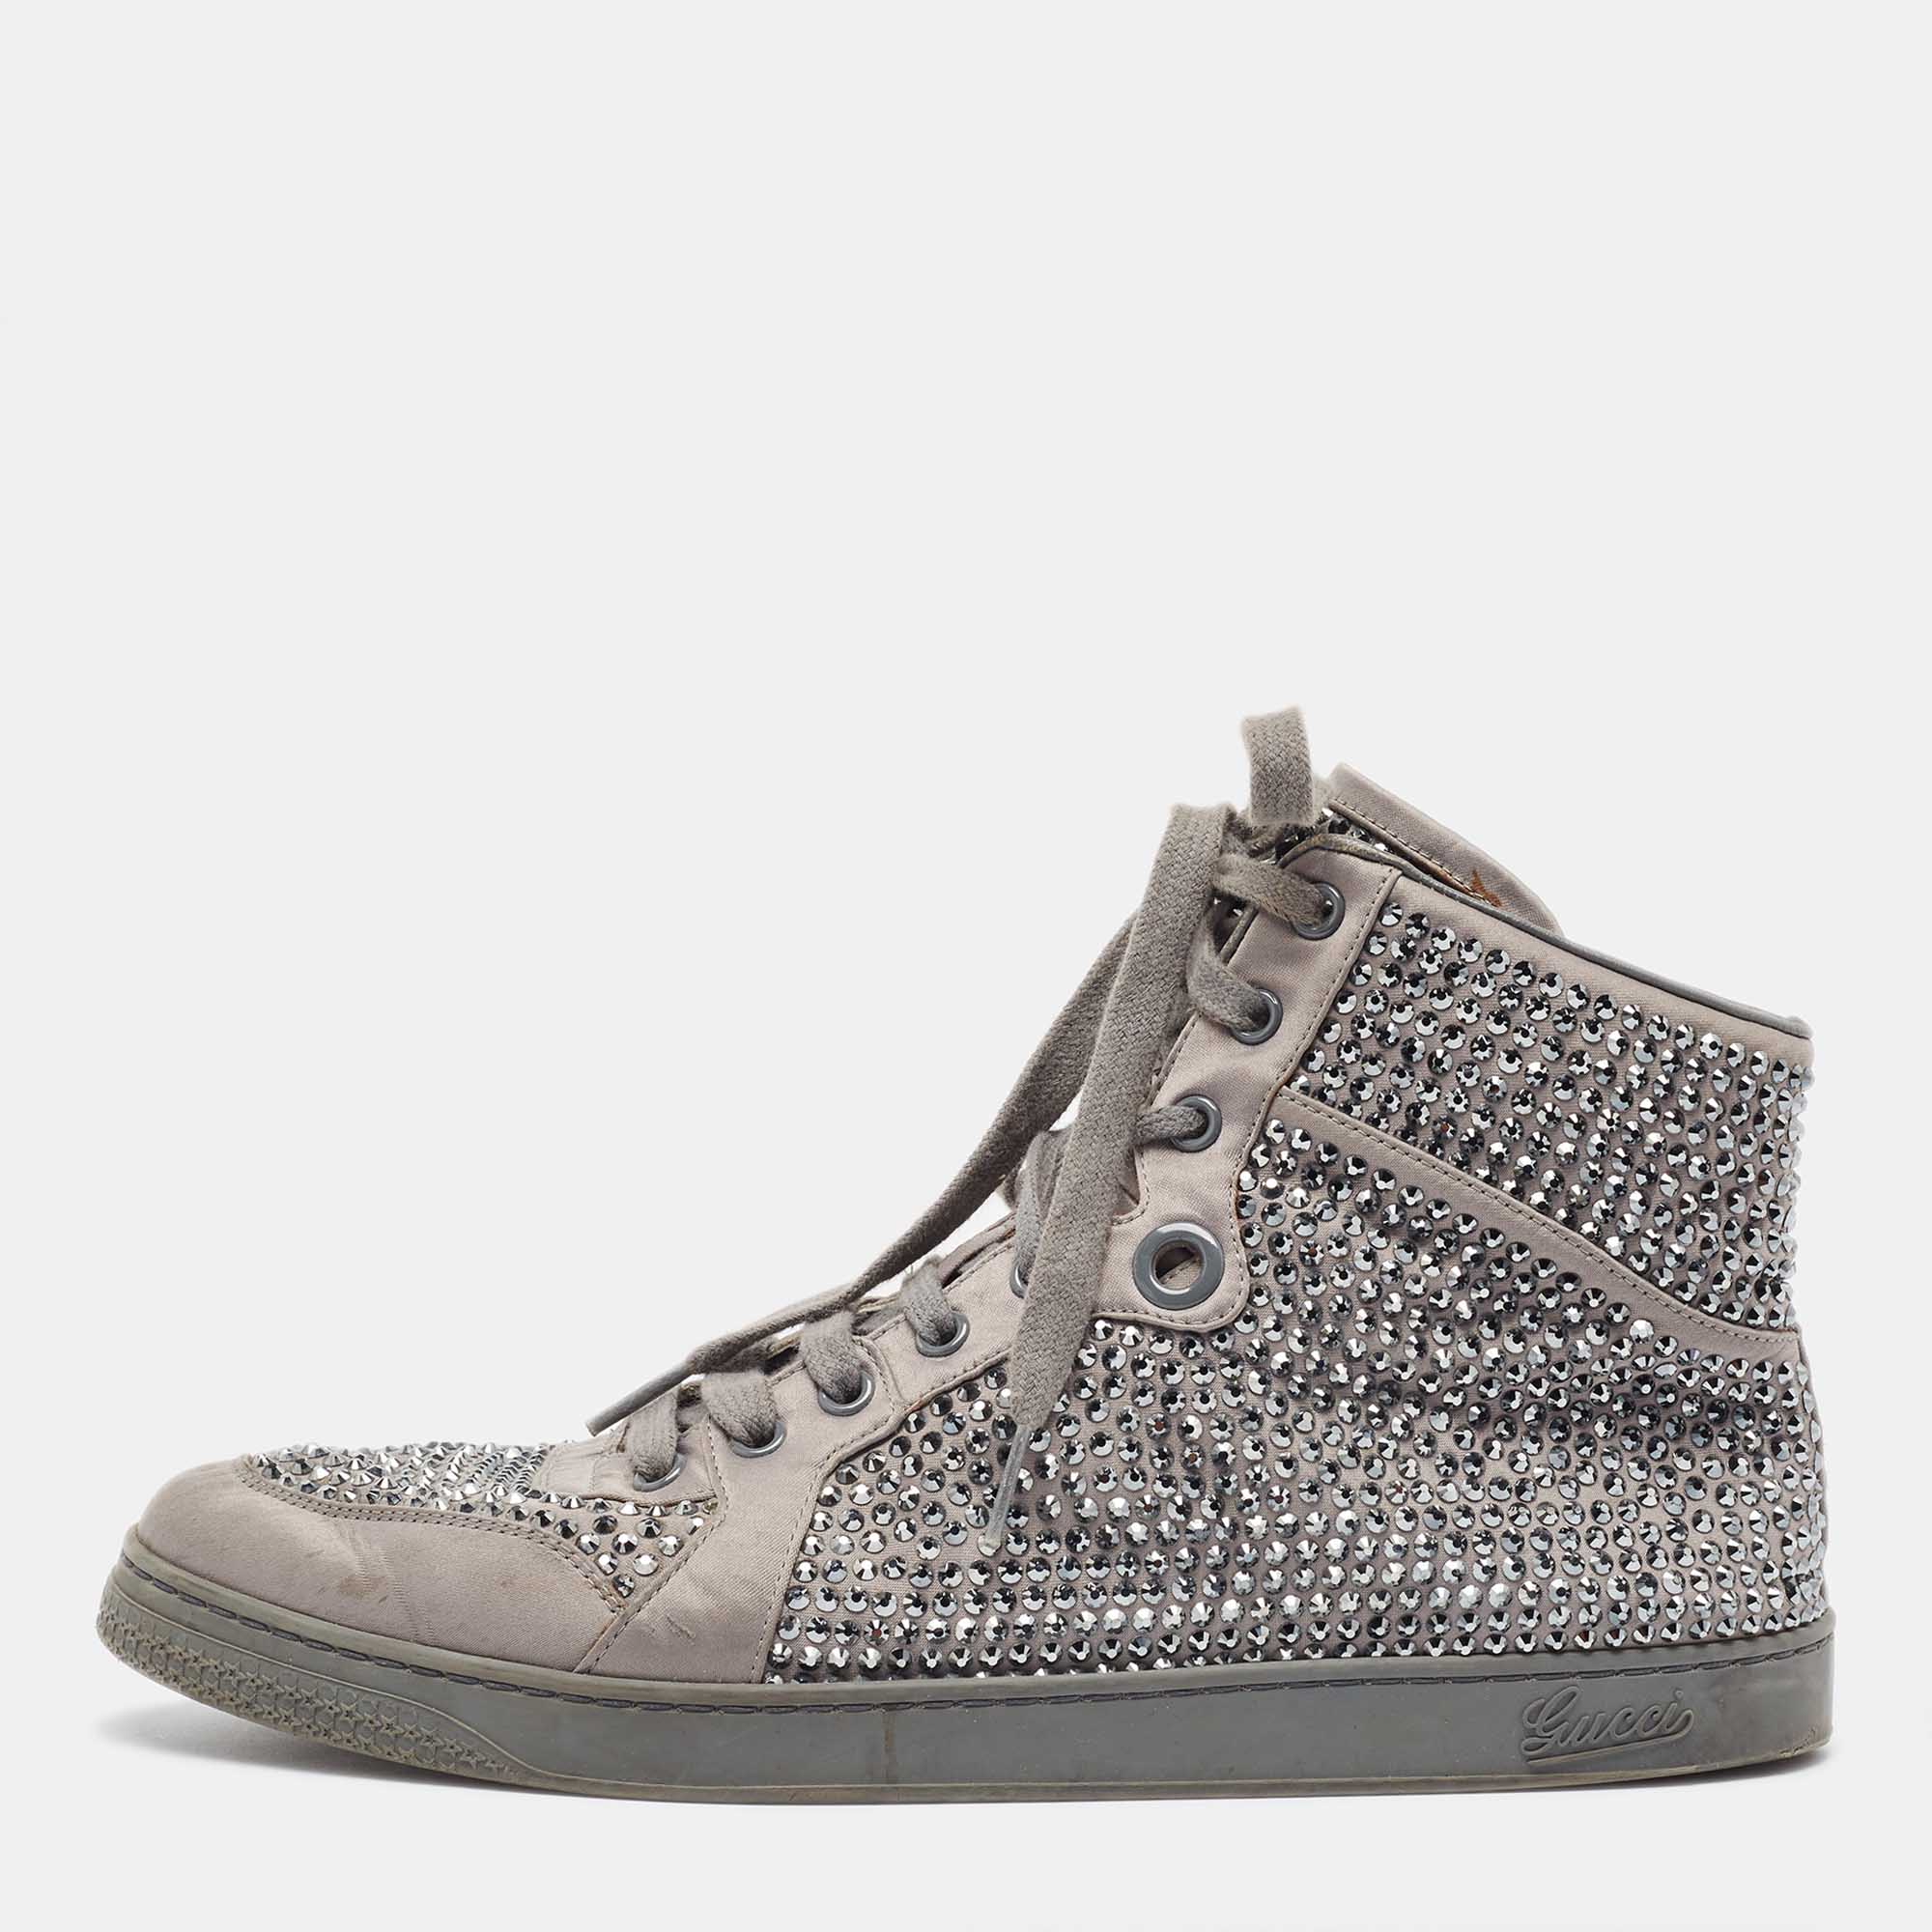 Pre-owned Gucci Grey Satin Crystal Embellished Coda High Top Sneakers Size 42